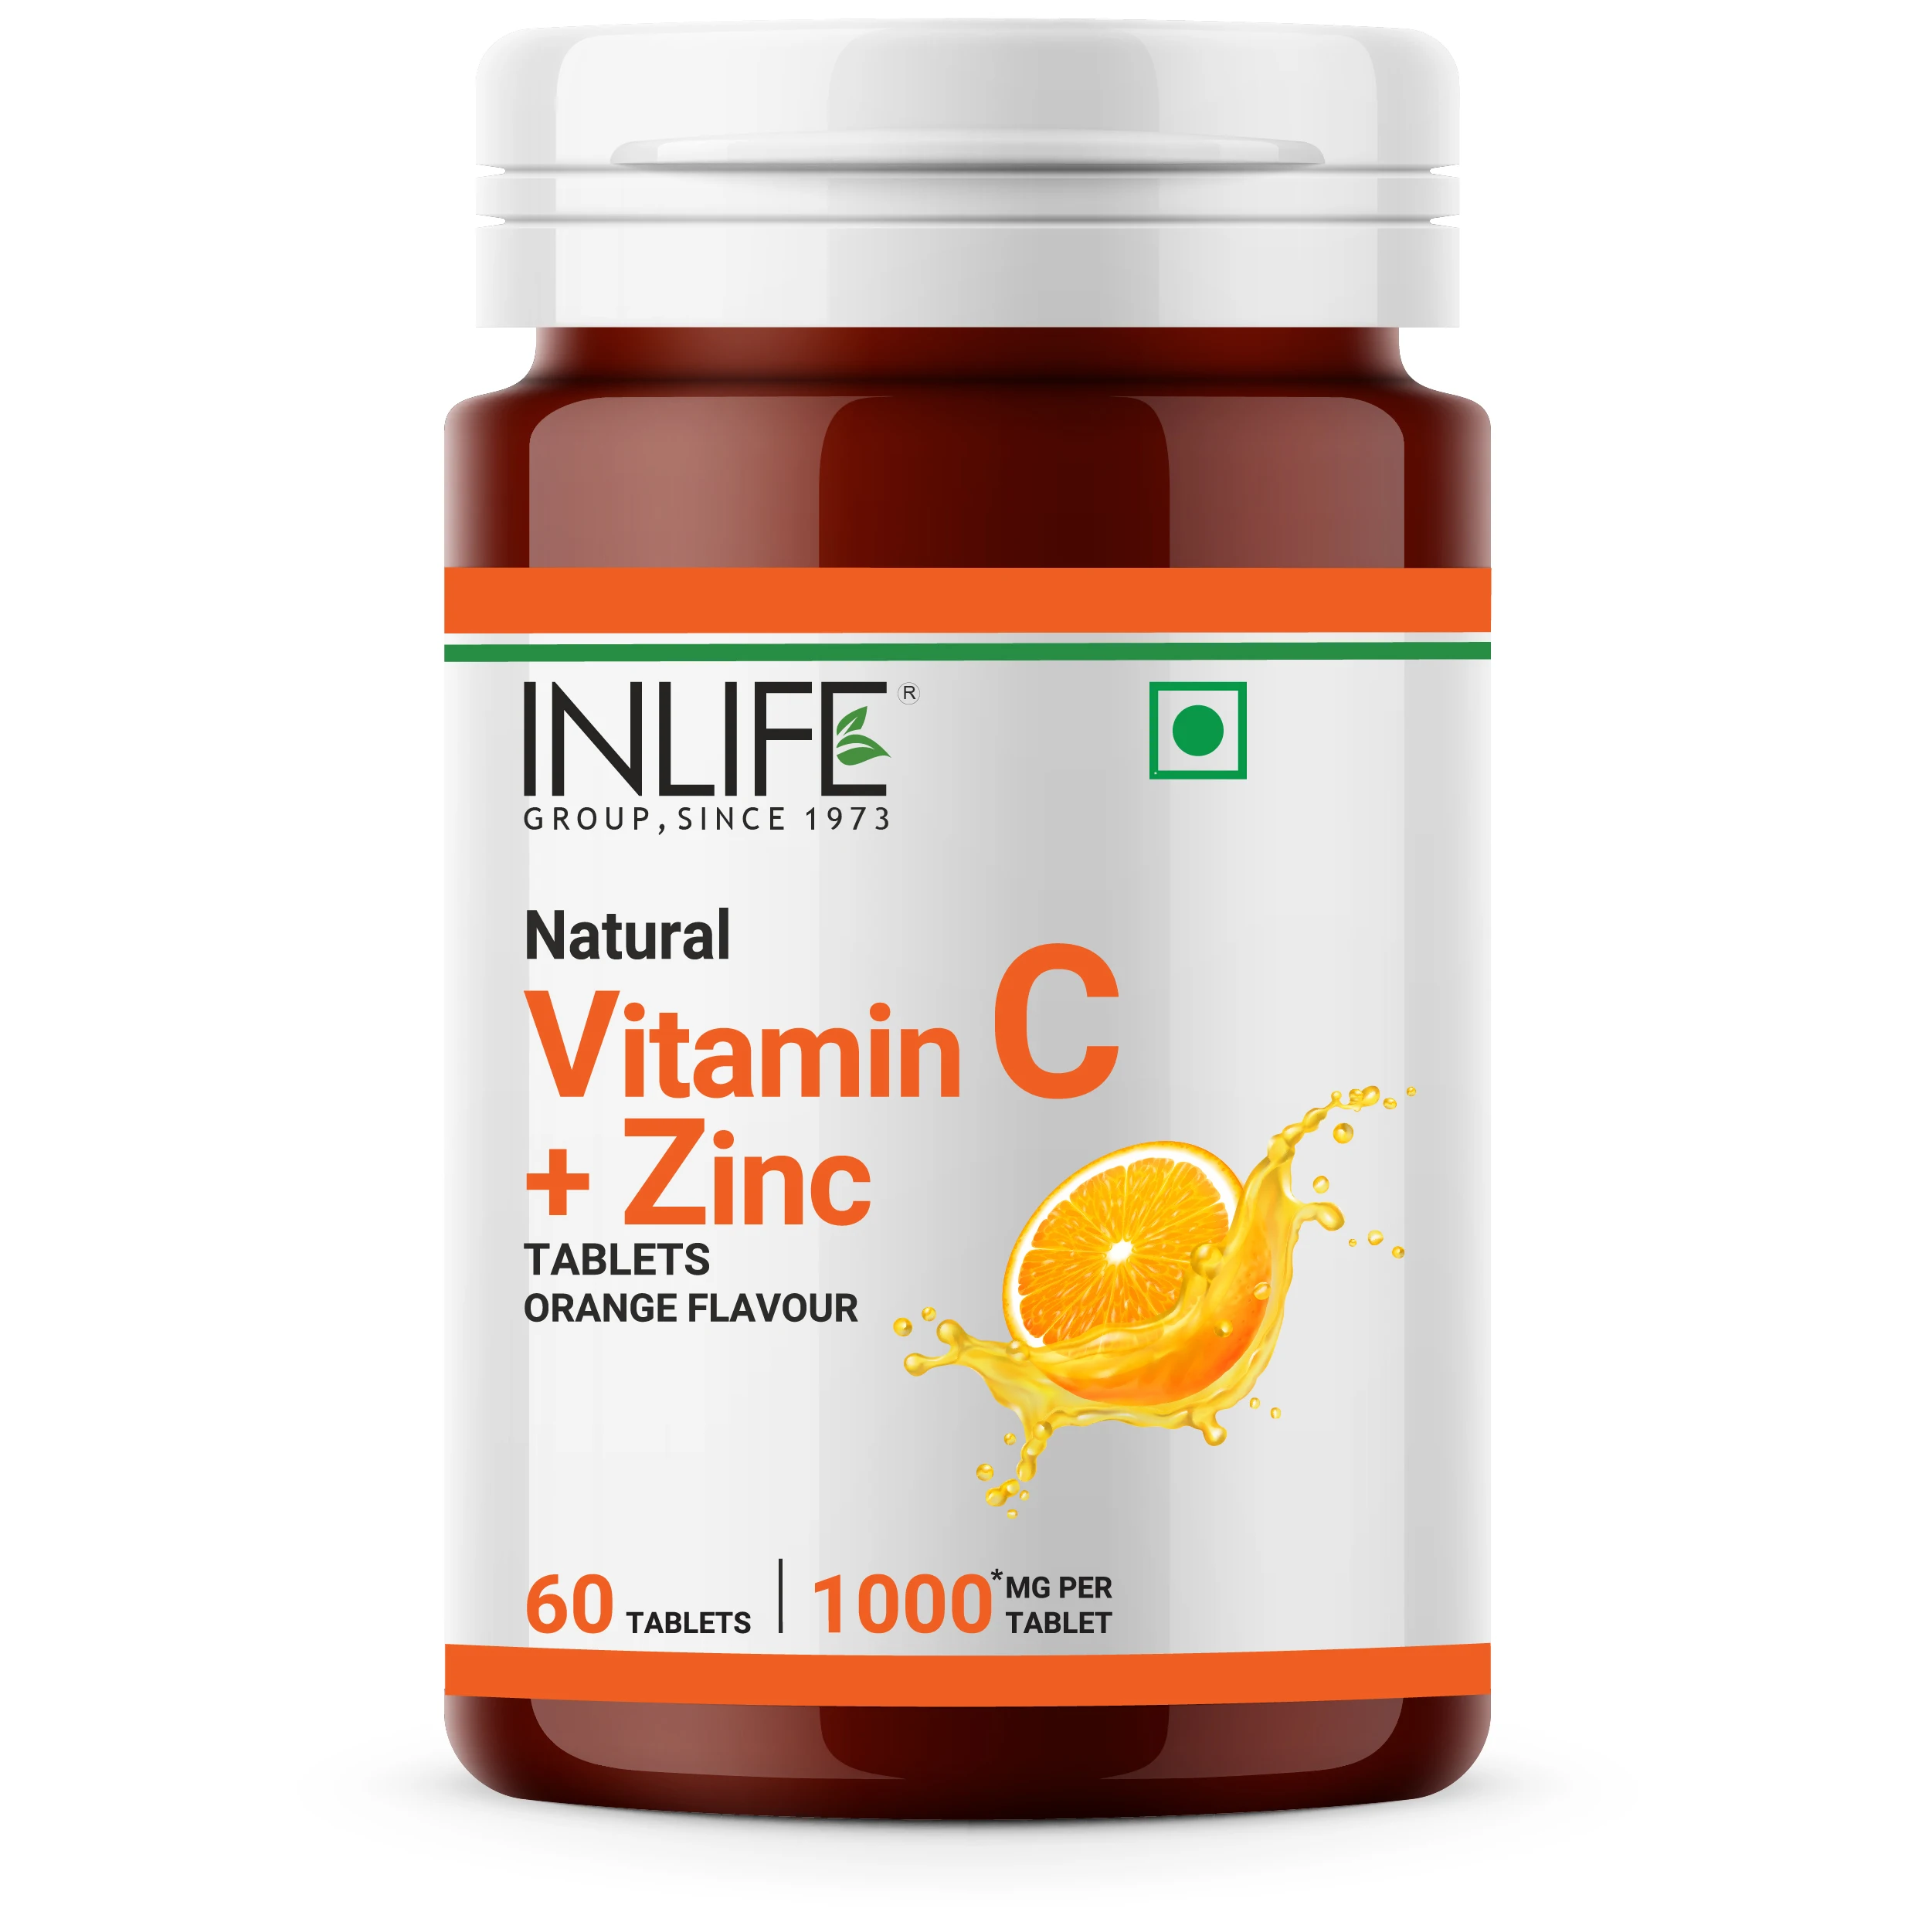 Inlife Vitamin C 1000mg With Zinc 10mg Tablet Immunity Booster Supplement For Men Women 60 Tablets Buy Vitamin C Tablet Vitamin C 1000 Vitamin C Supplement Product On Alibaba Com